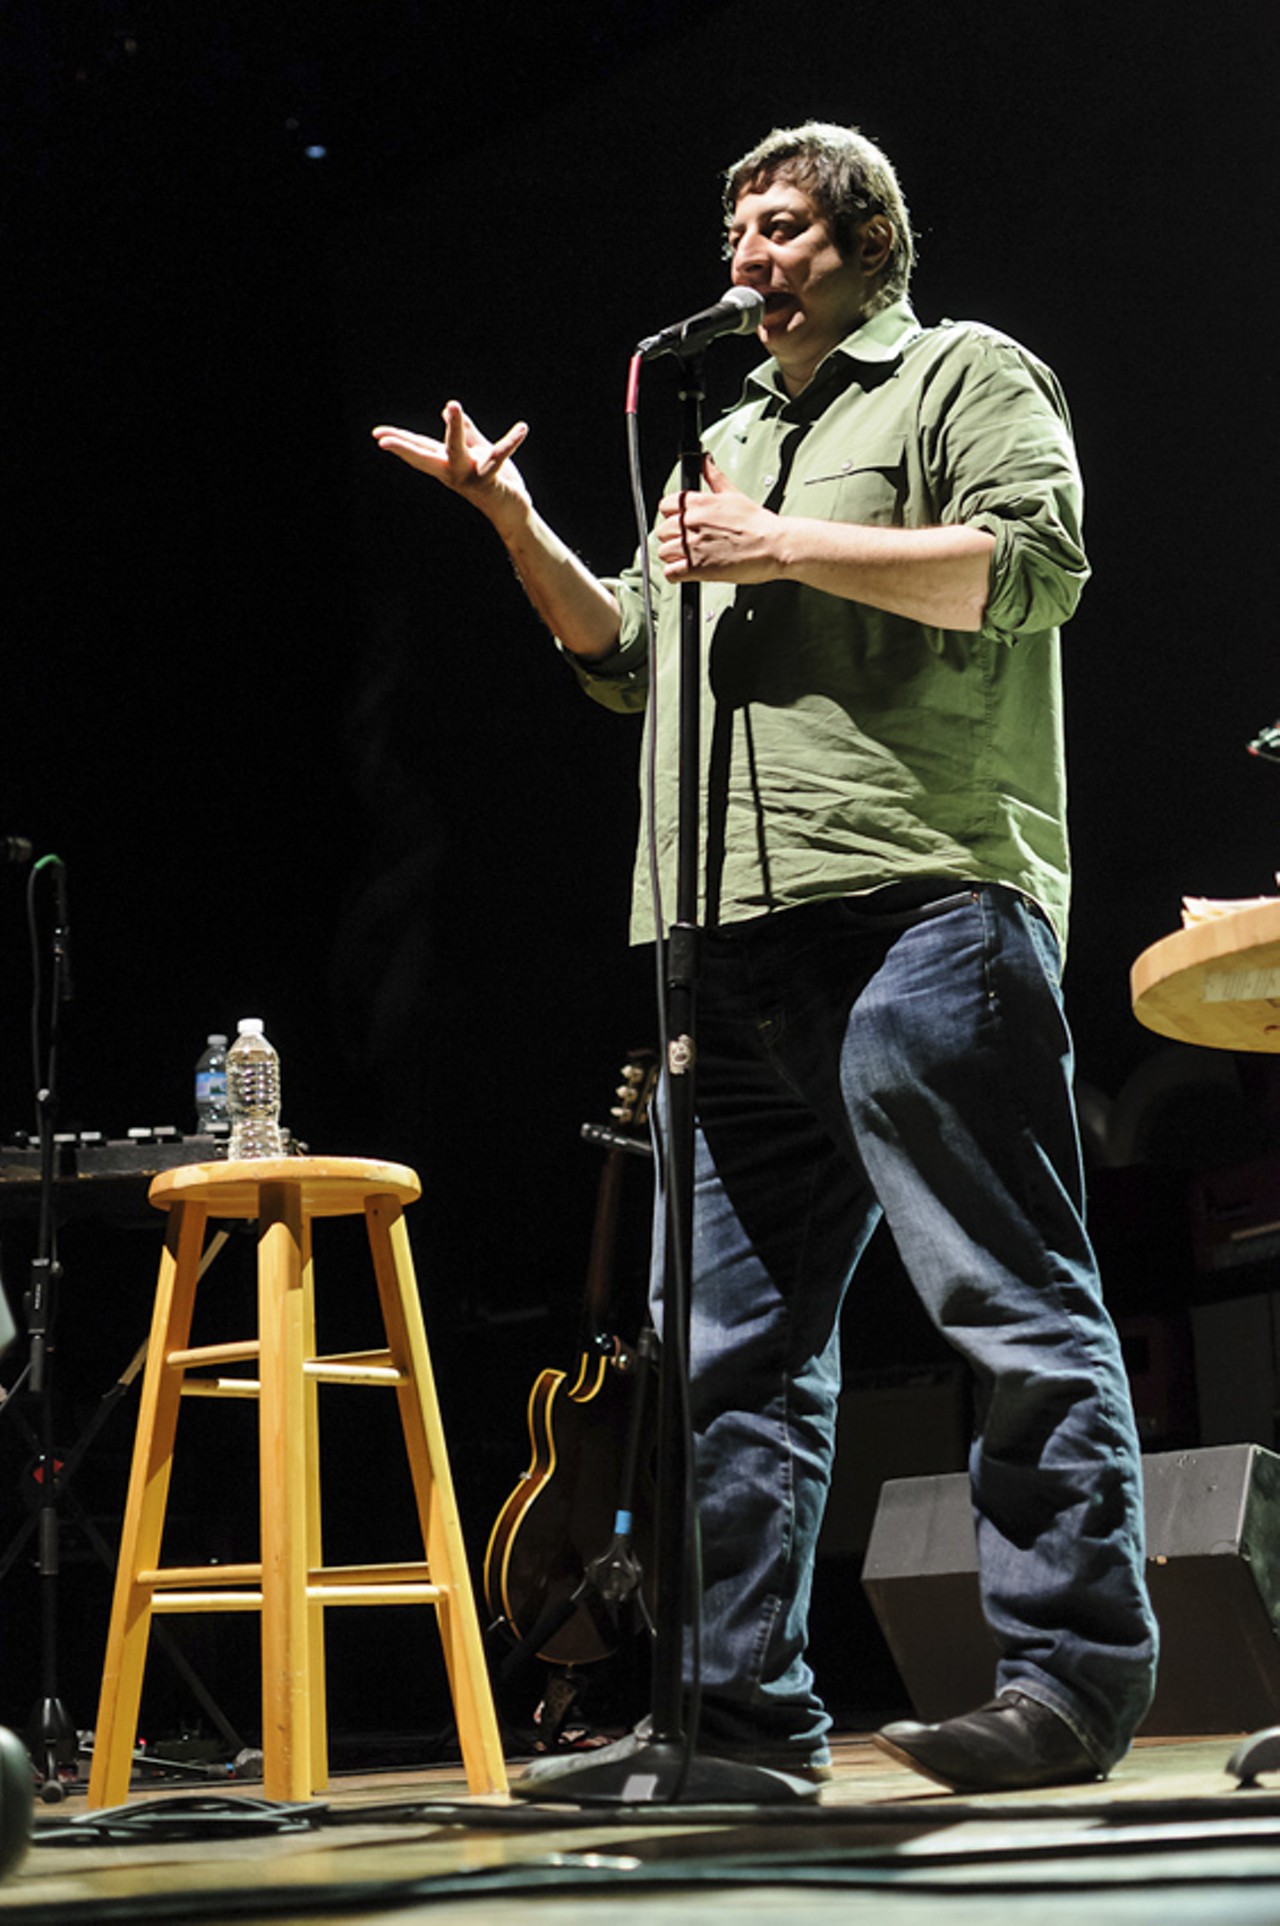 Comedian Eugene Mirman, opening for Andrew Bird at The Pageant.